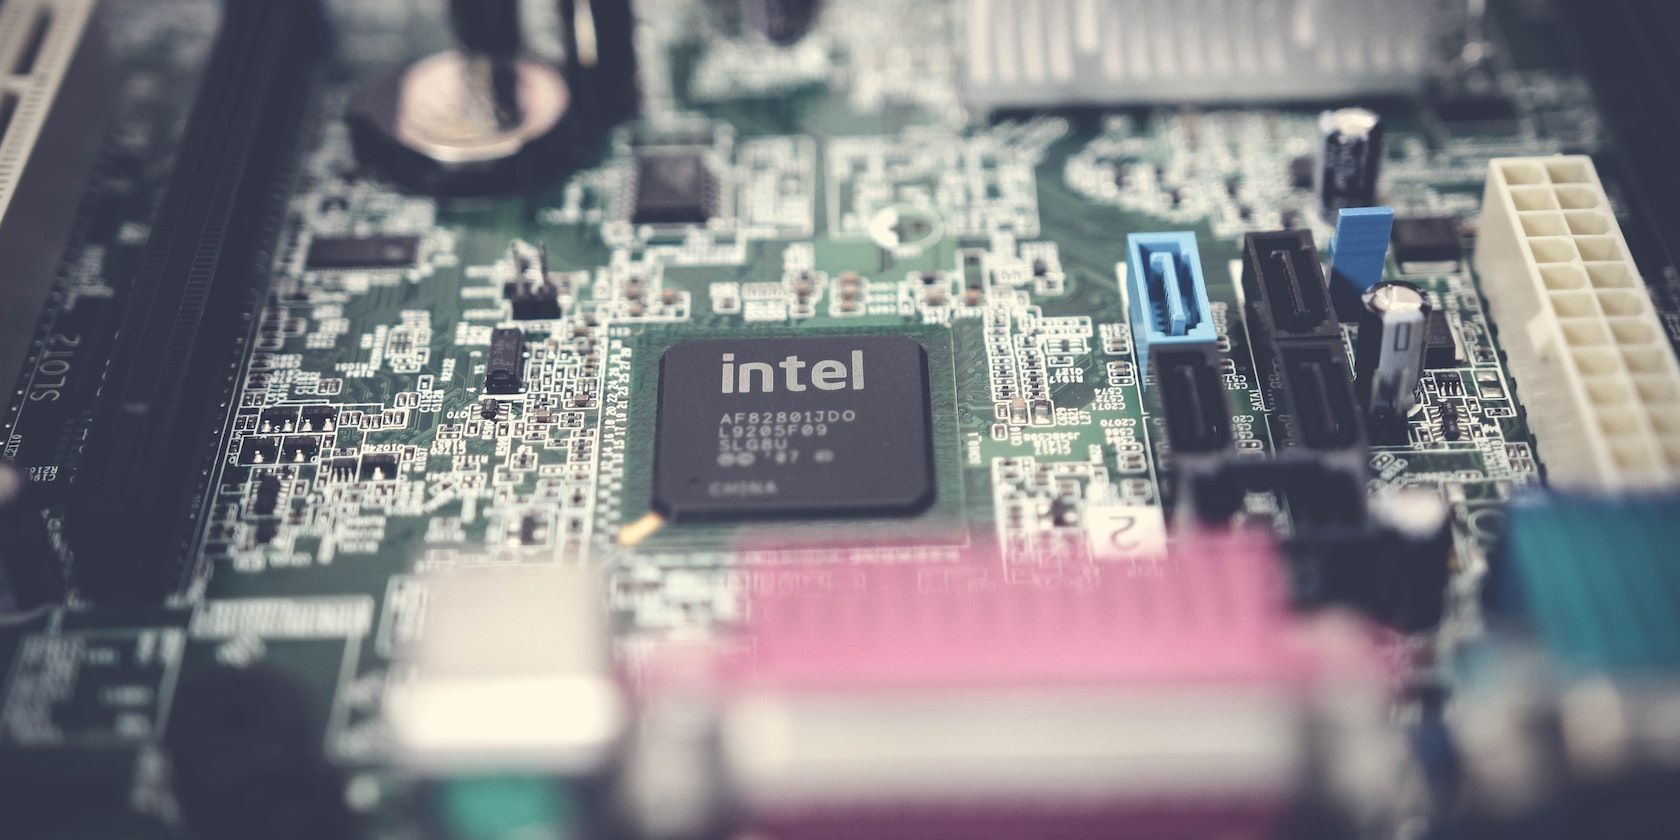 An Intel CPU with AMT support